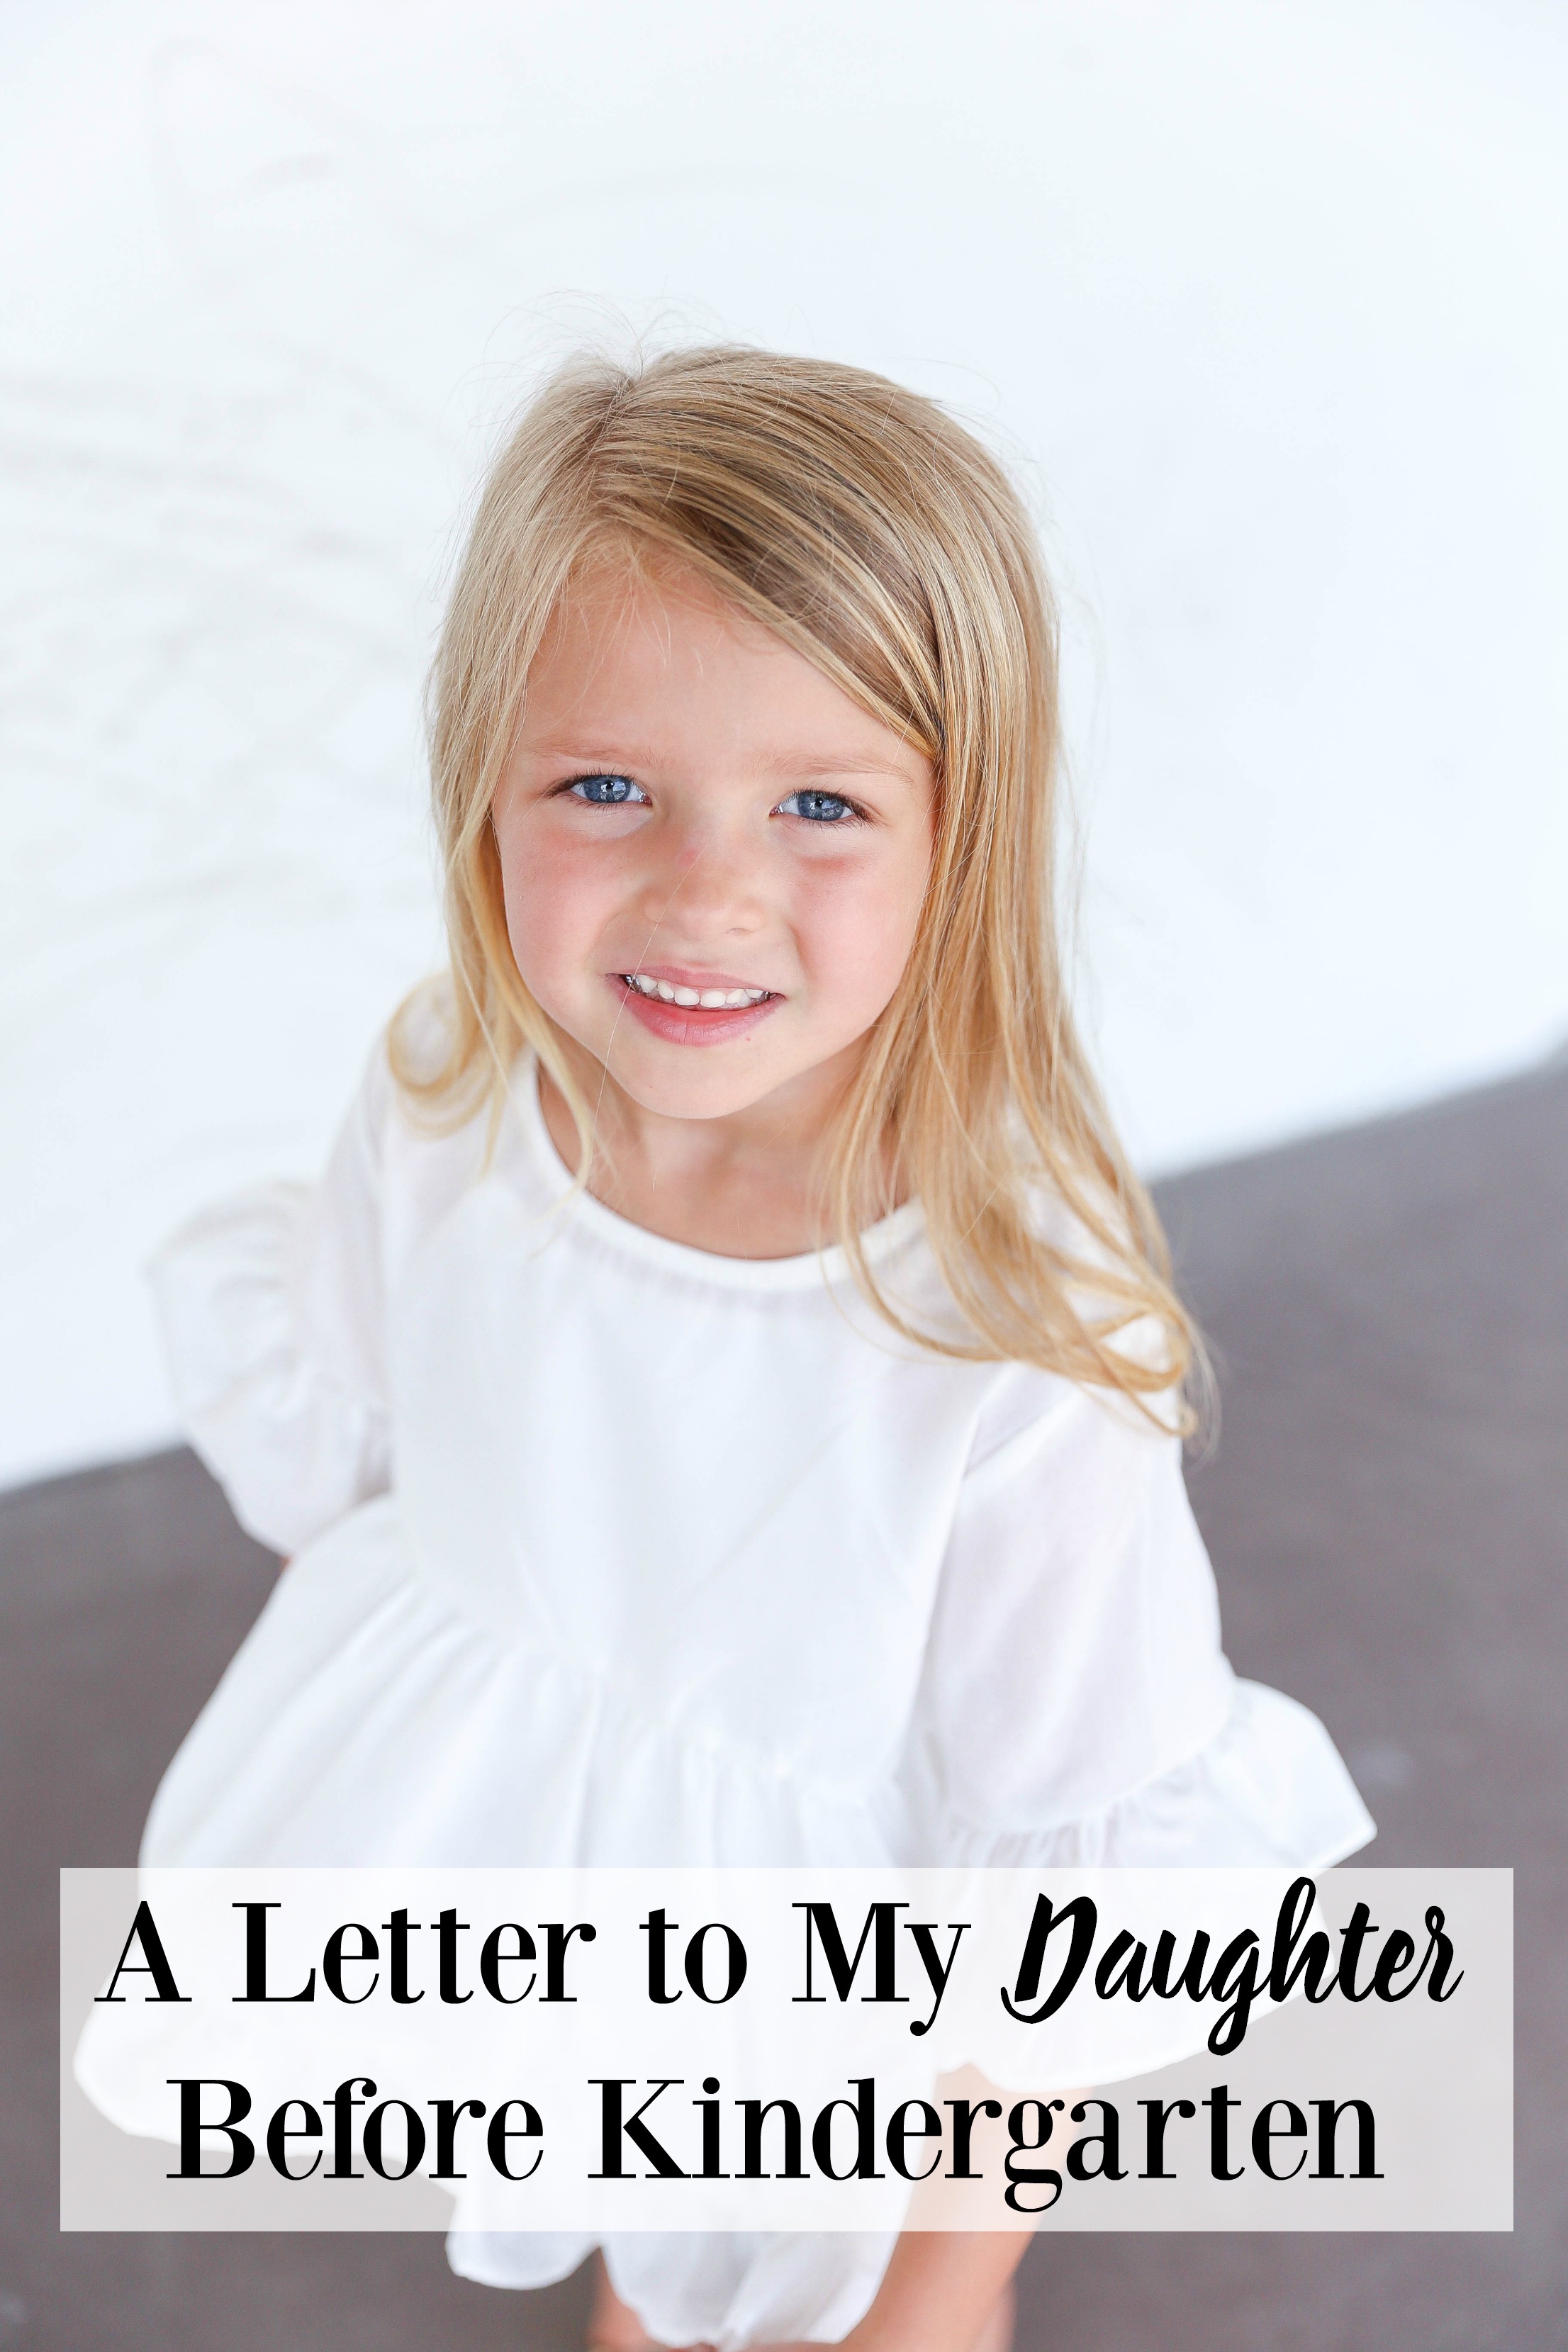 A letter to my daughter before Kindergarten